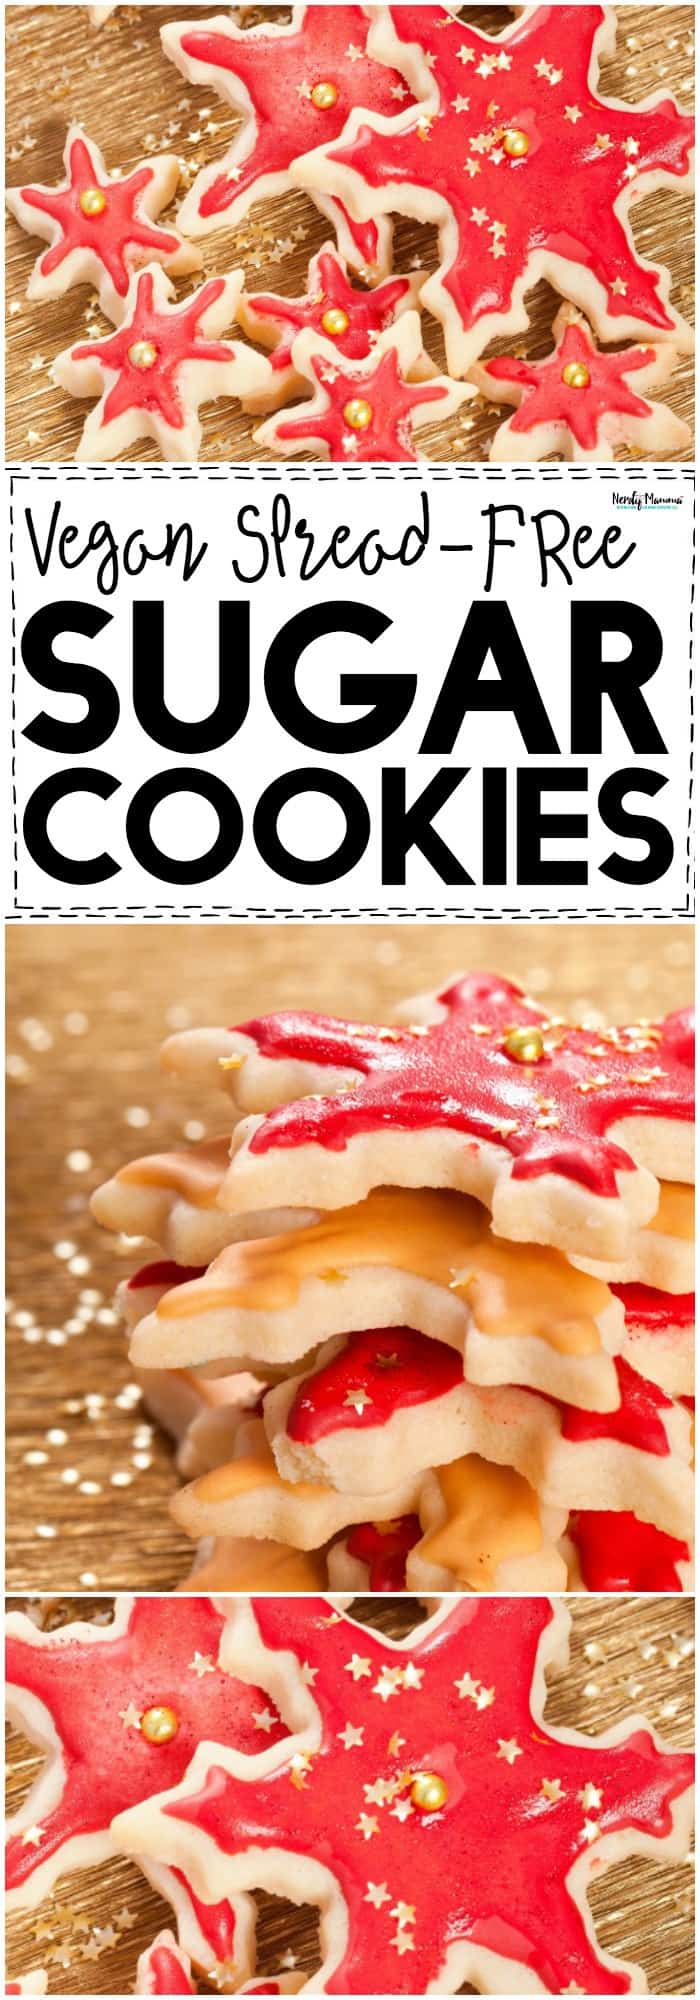 OMG These delicious sugar cookies are VEGAN and they don't spread AT ALL! They're the BEST Vegan Christmas Cookies EVER! #SugarCookies #cookierecipe #veganrecipe #vegandesserts #vegancookies